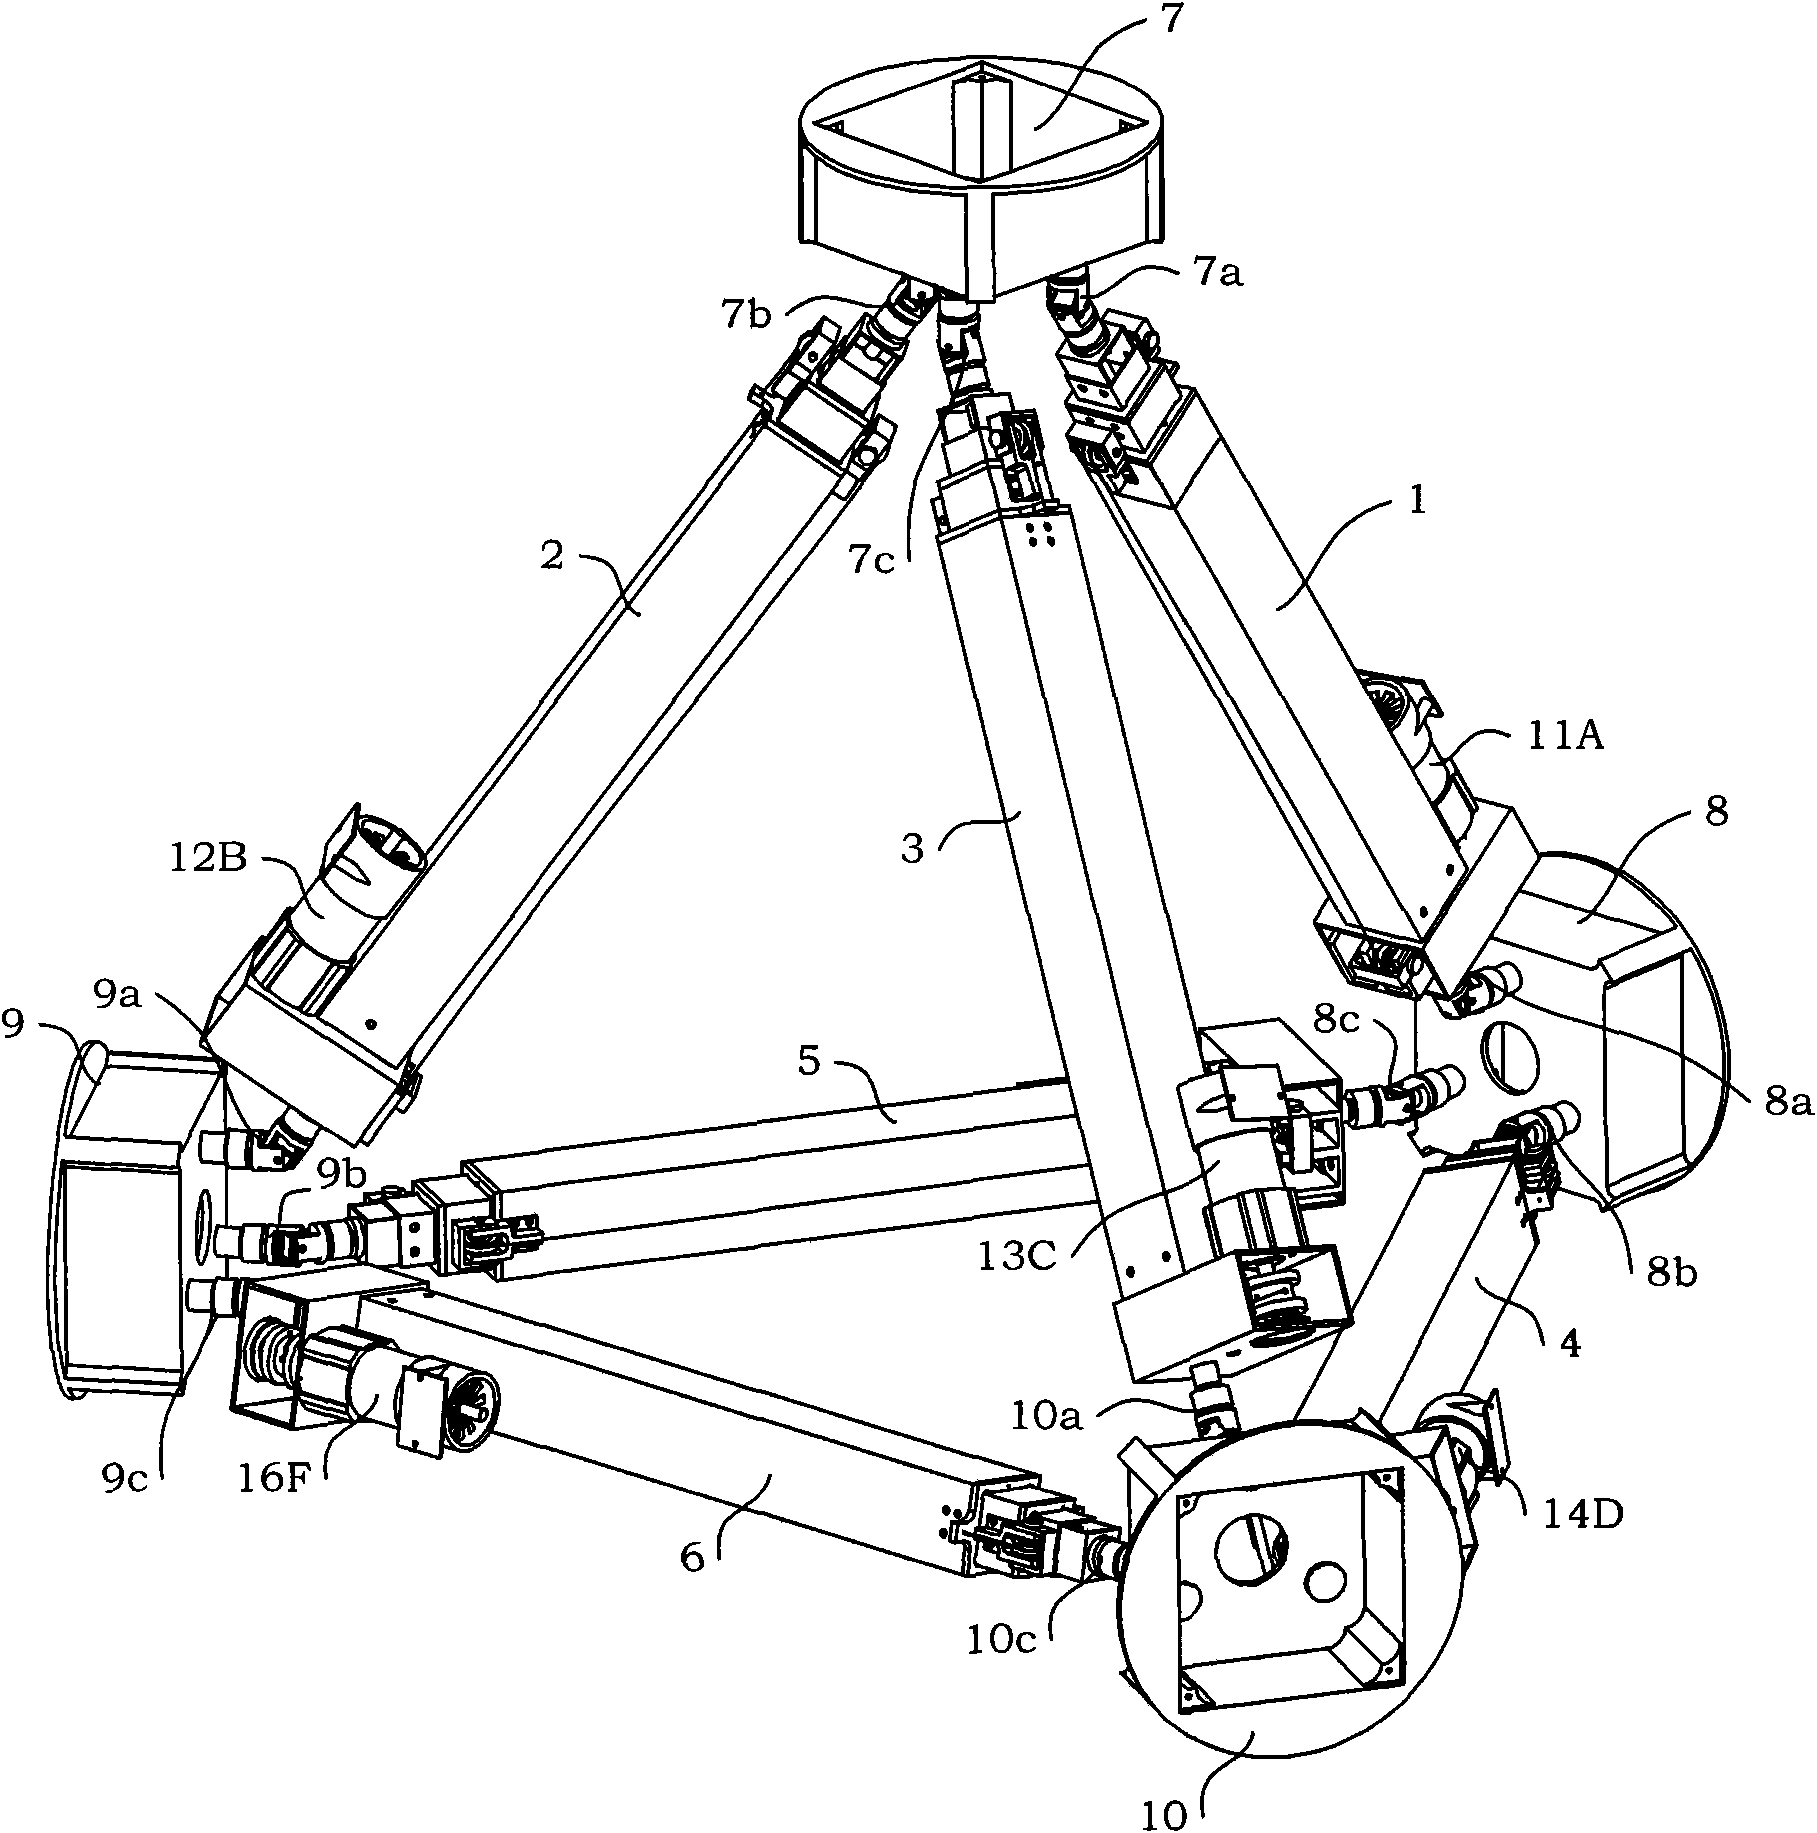 Tetrahedral rolling robot with parallel mechanism